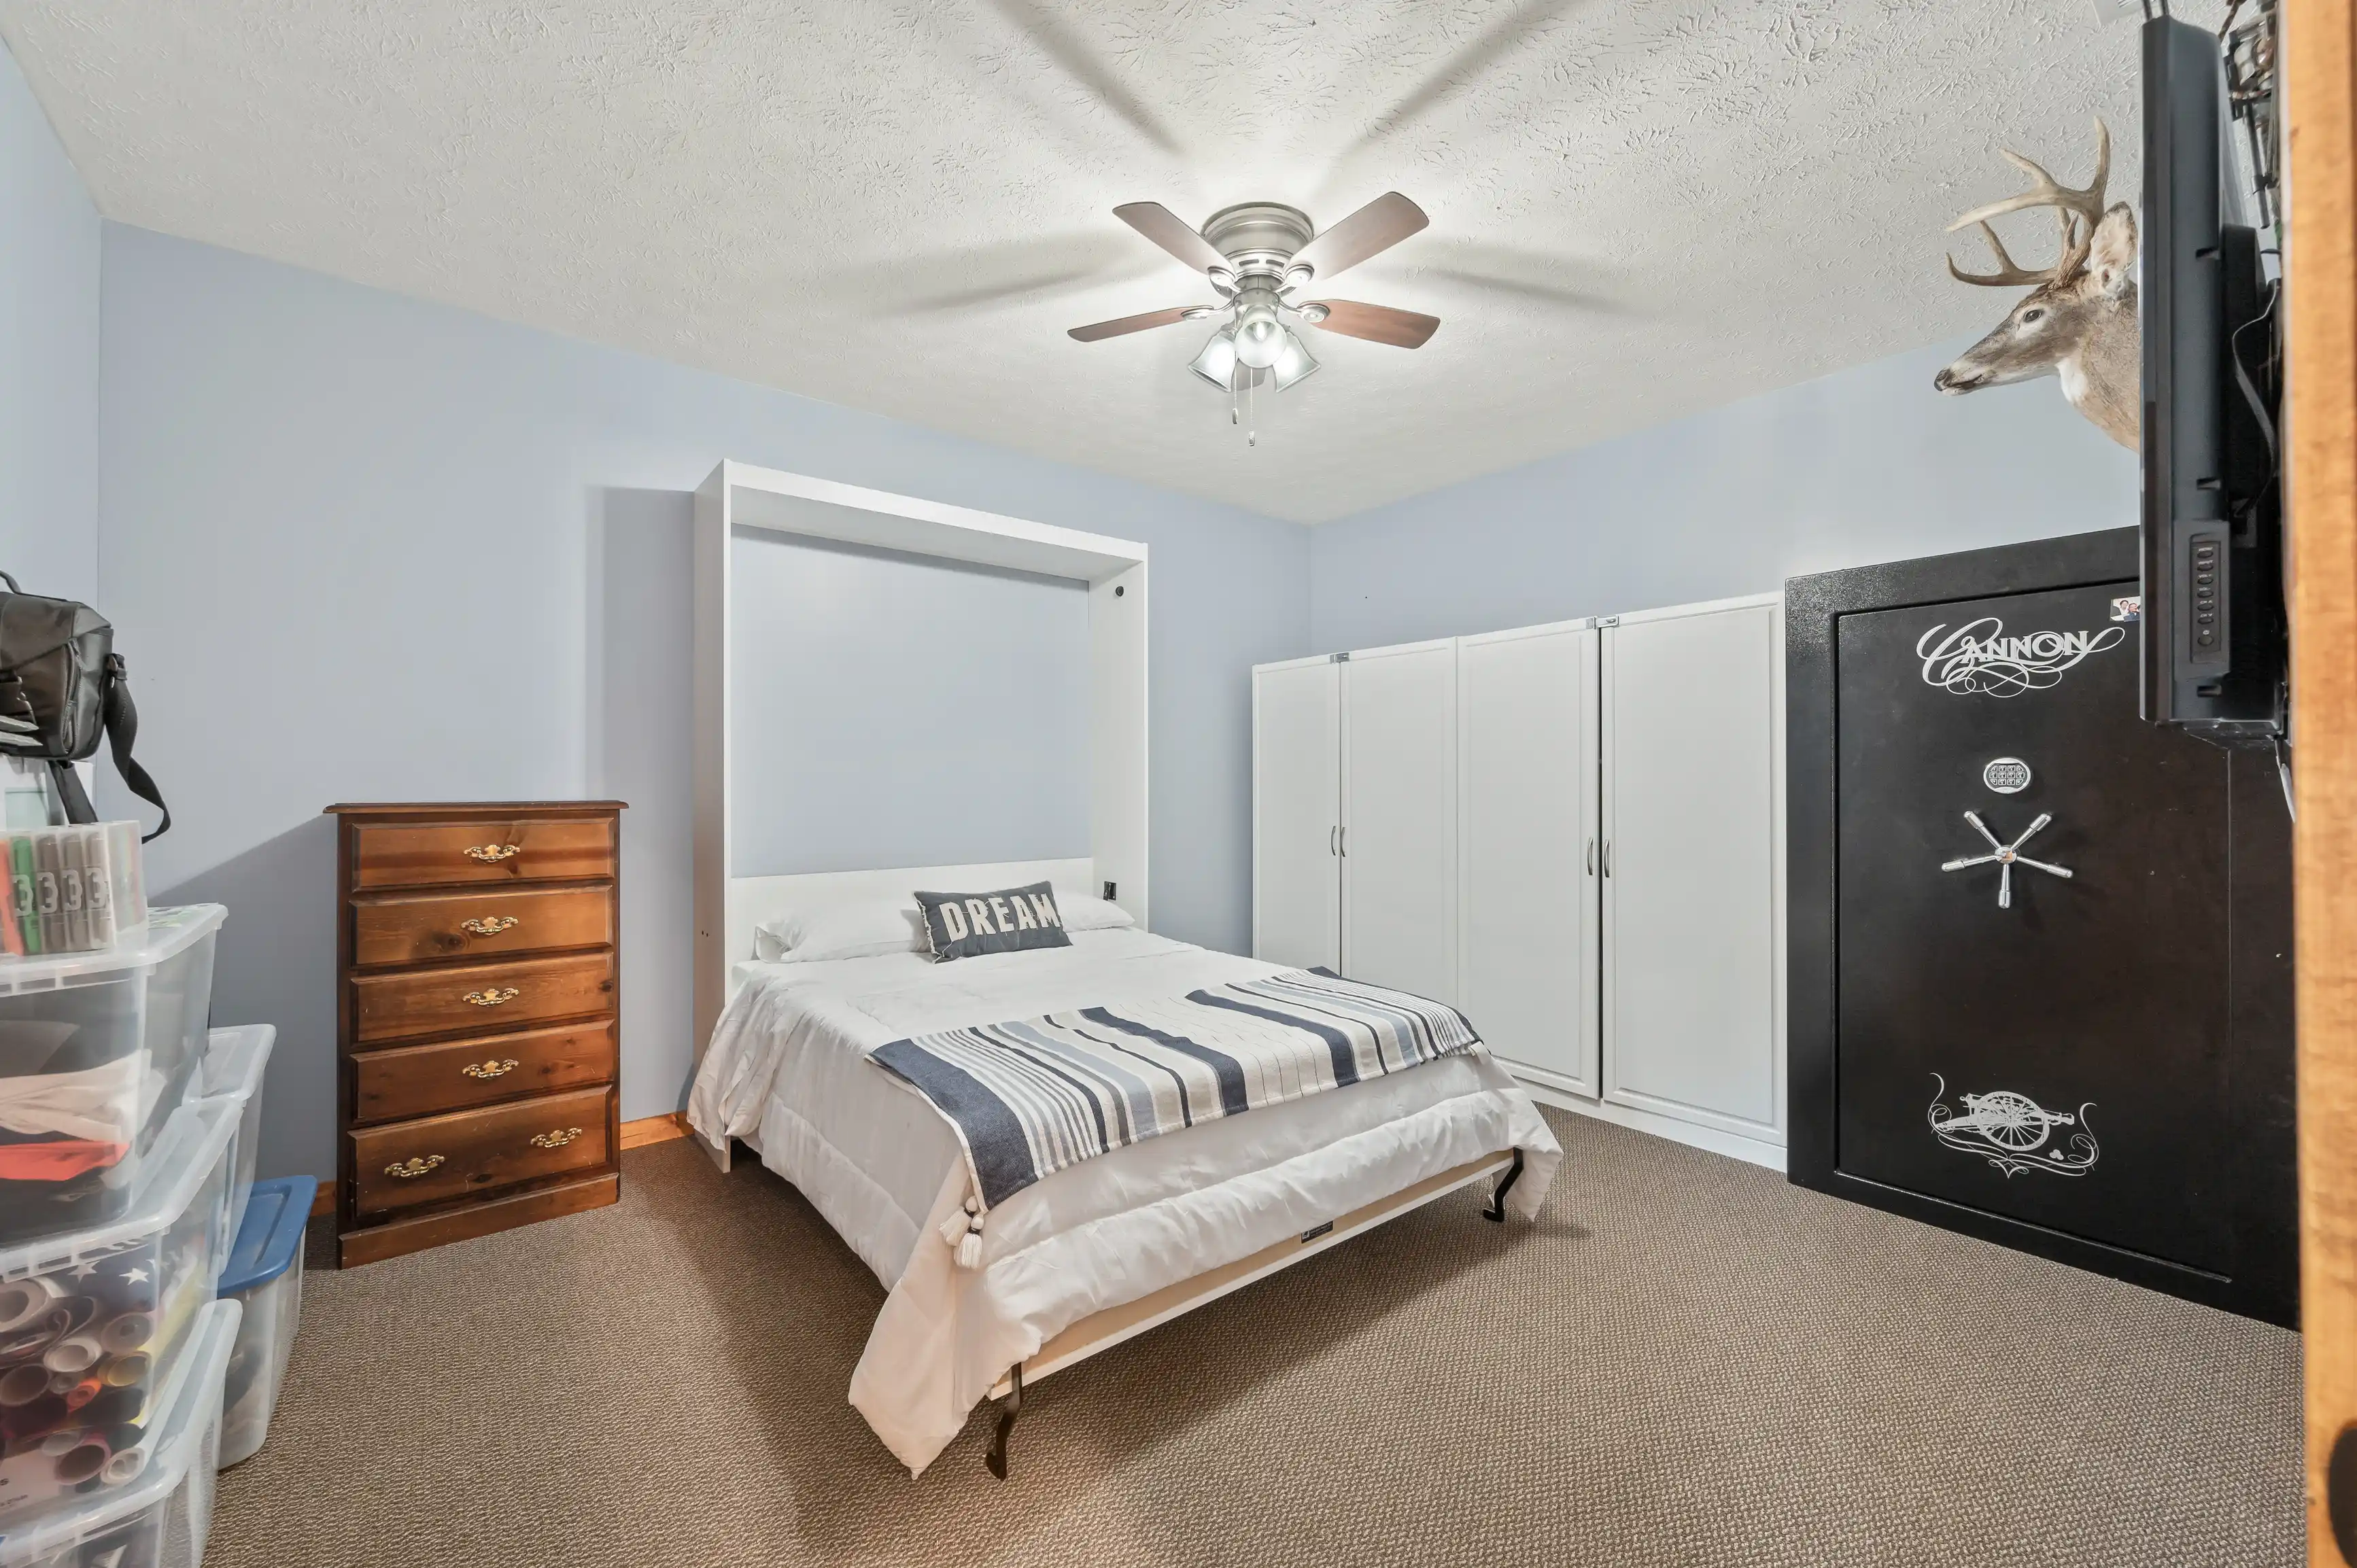 A well-lit bedroom with light blue walls, a white ceiling fan, a double bed with a striped blue-and-white comforter, a brown wooden dresser, white wardrobes, a wall-mounted deer head, and a large black safe with stickers.